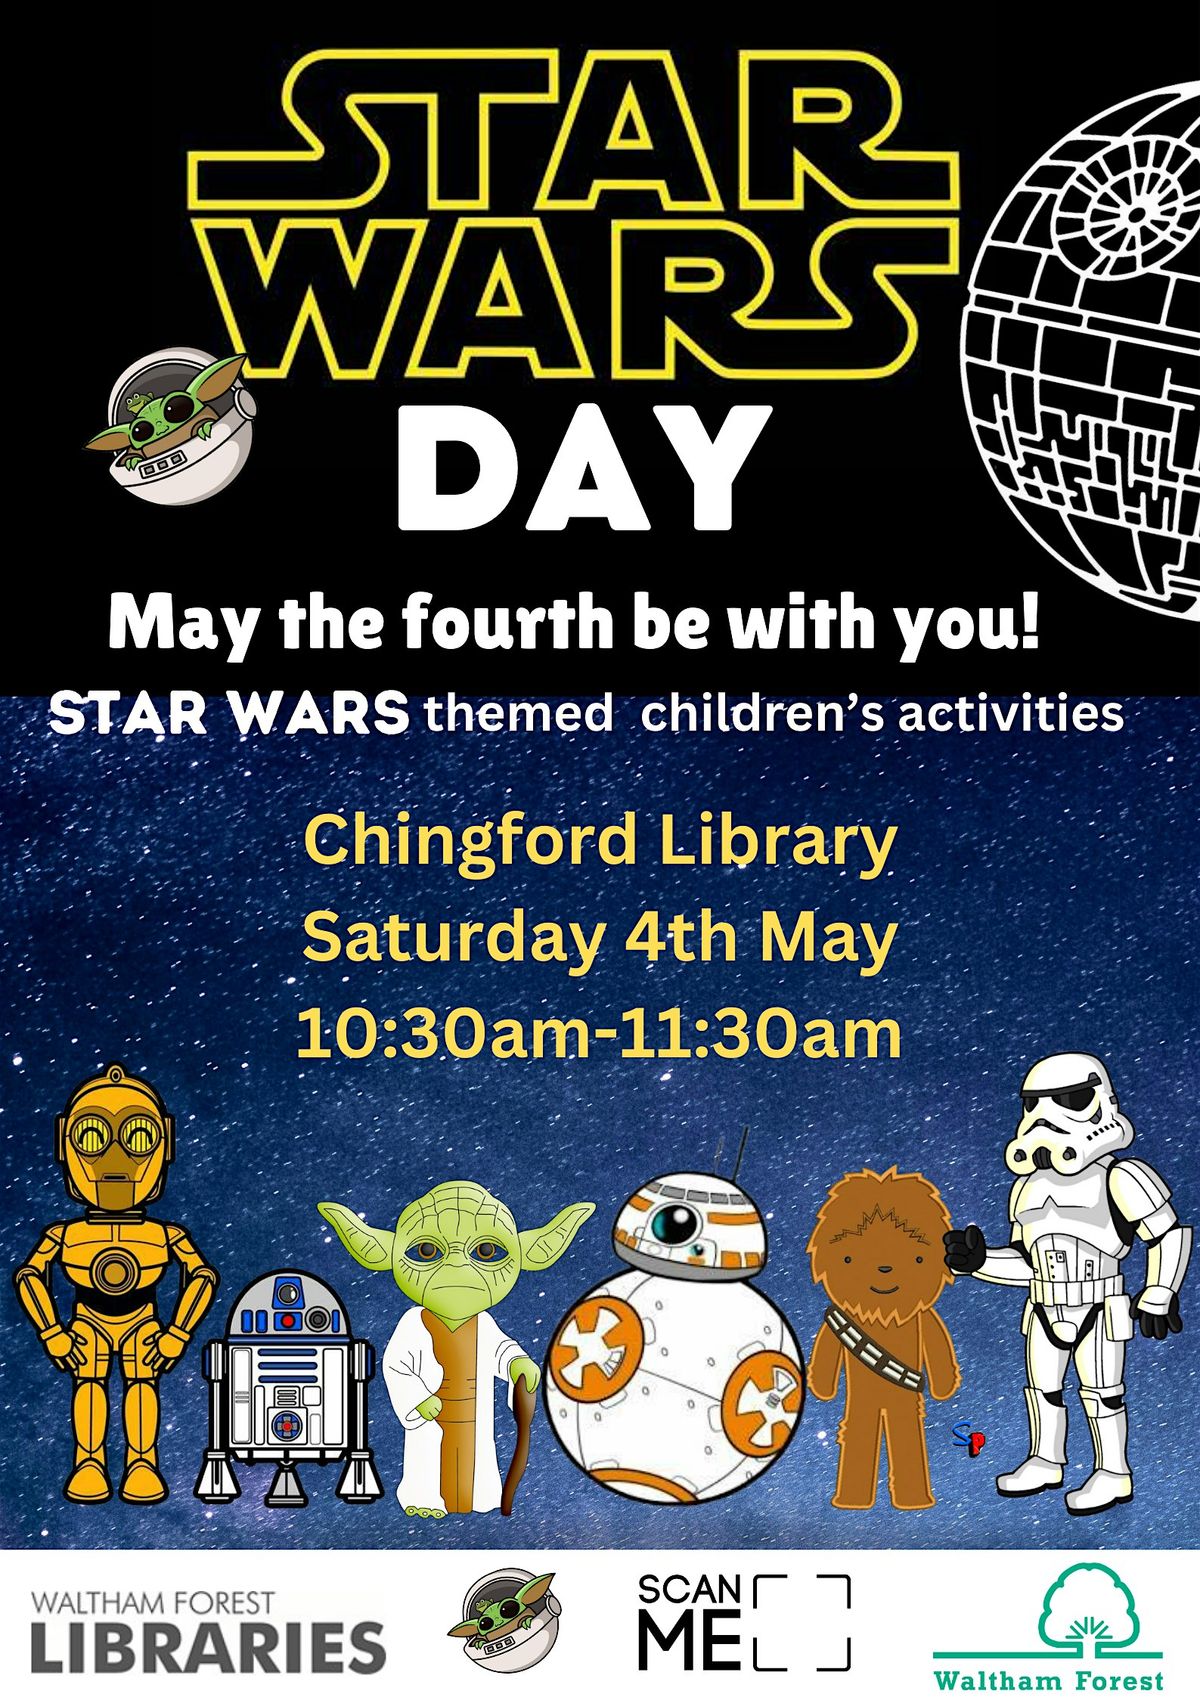 Star Wars Day @Wood Street Library